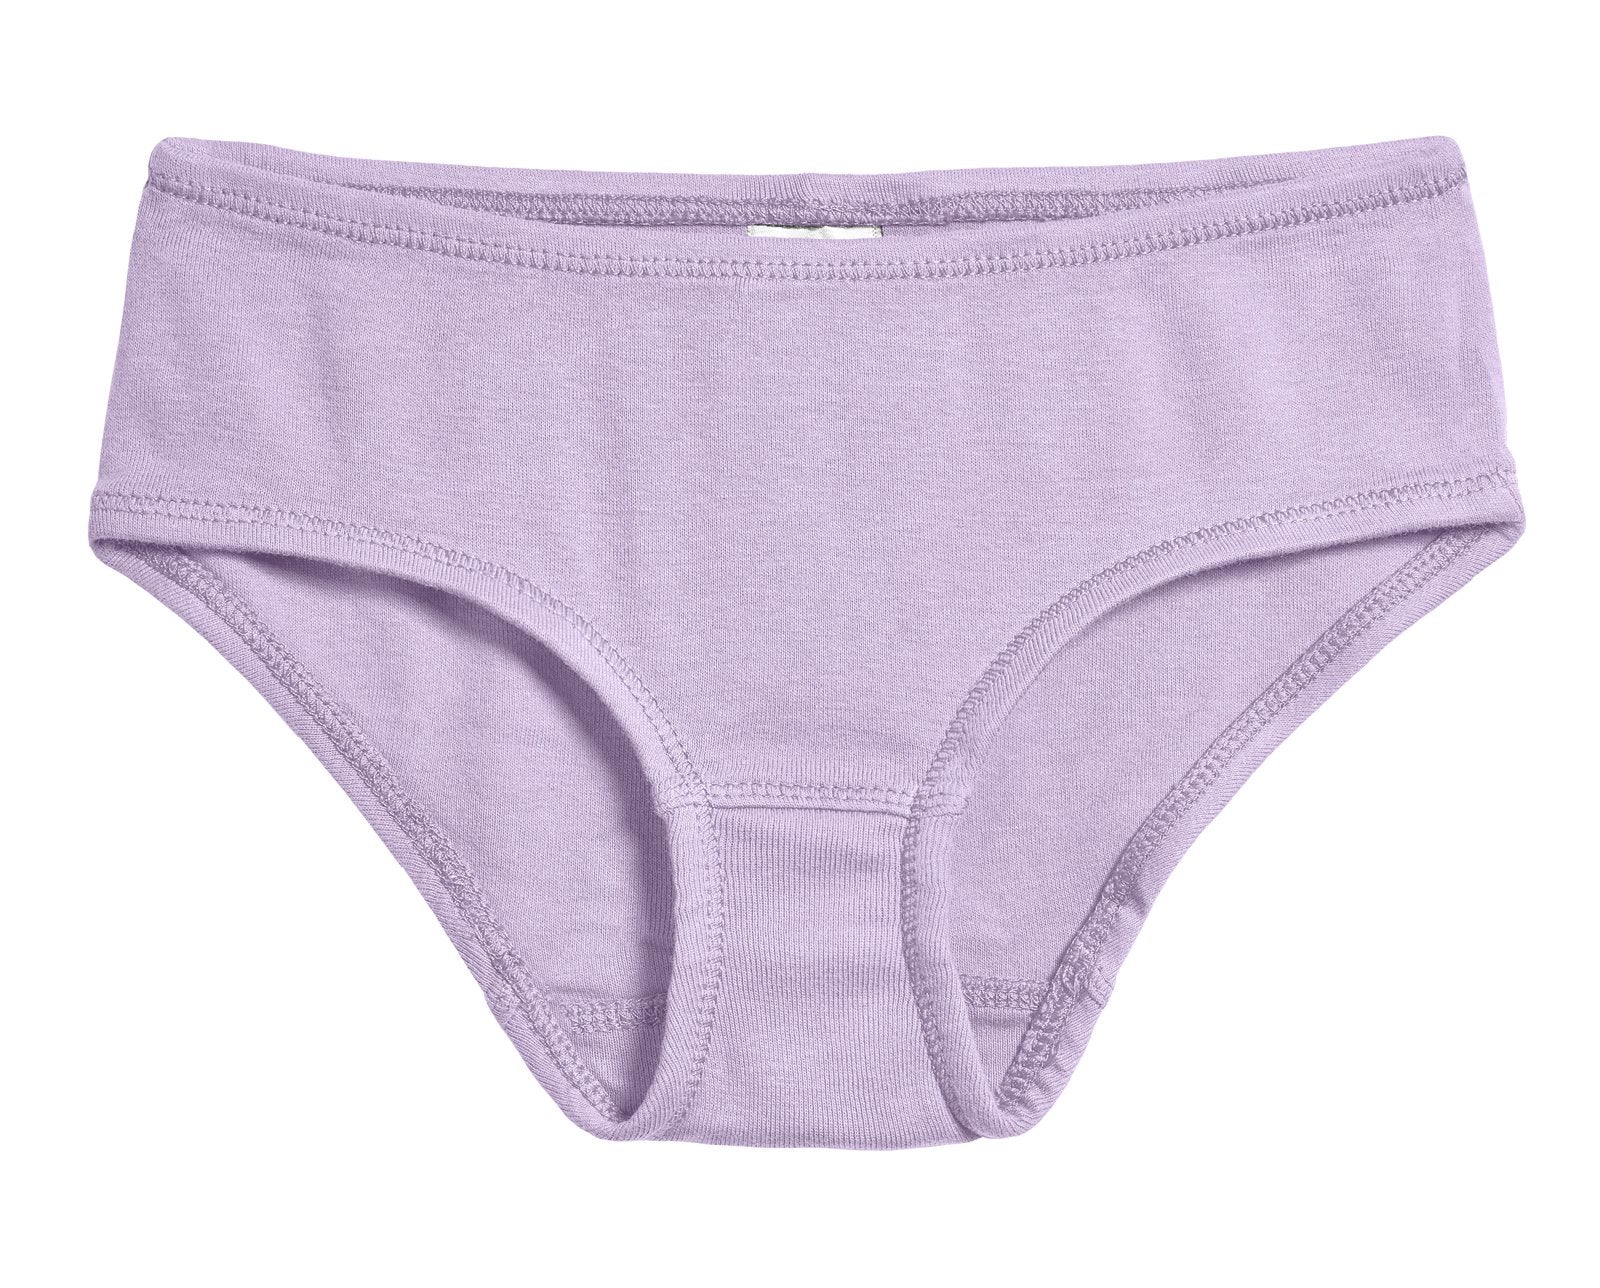 New Organic Cotton Underwear for Teen Girl Simplicity Traceless